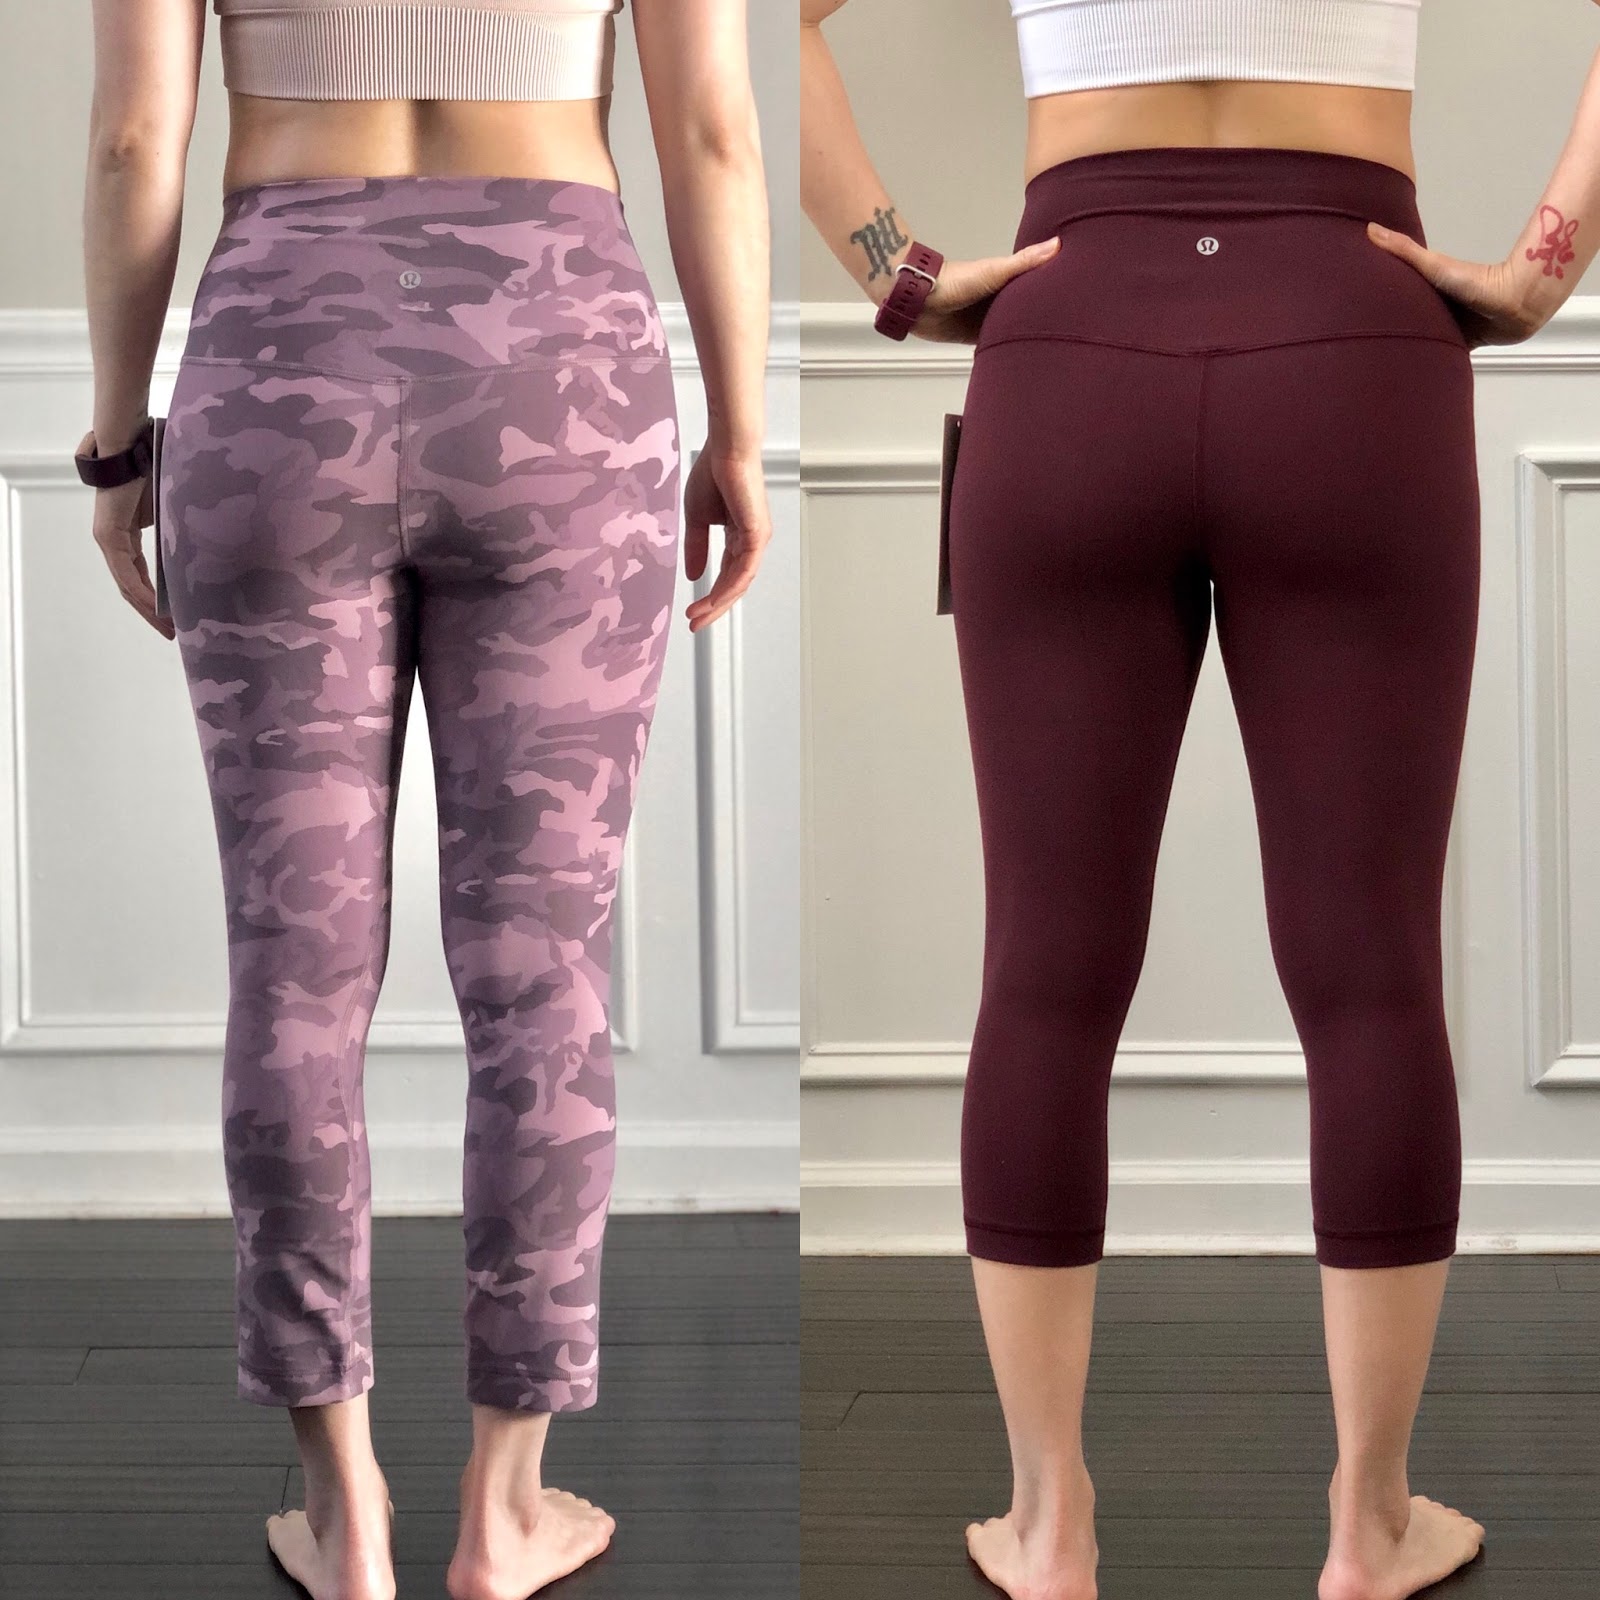 FIT REVIEW! ALIGN CROP HIGH RISE 17 VS. ALIGN CROP 21 AND HOTTY